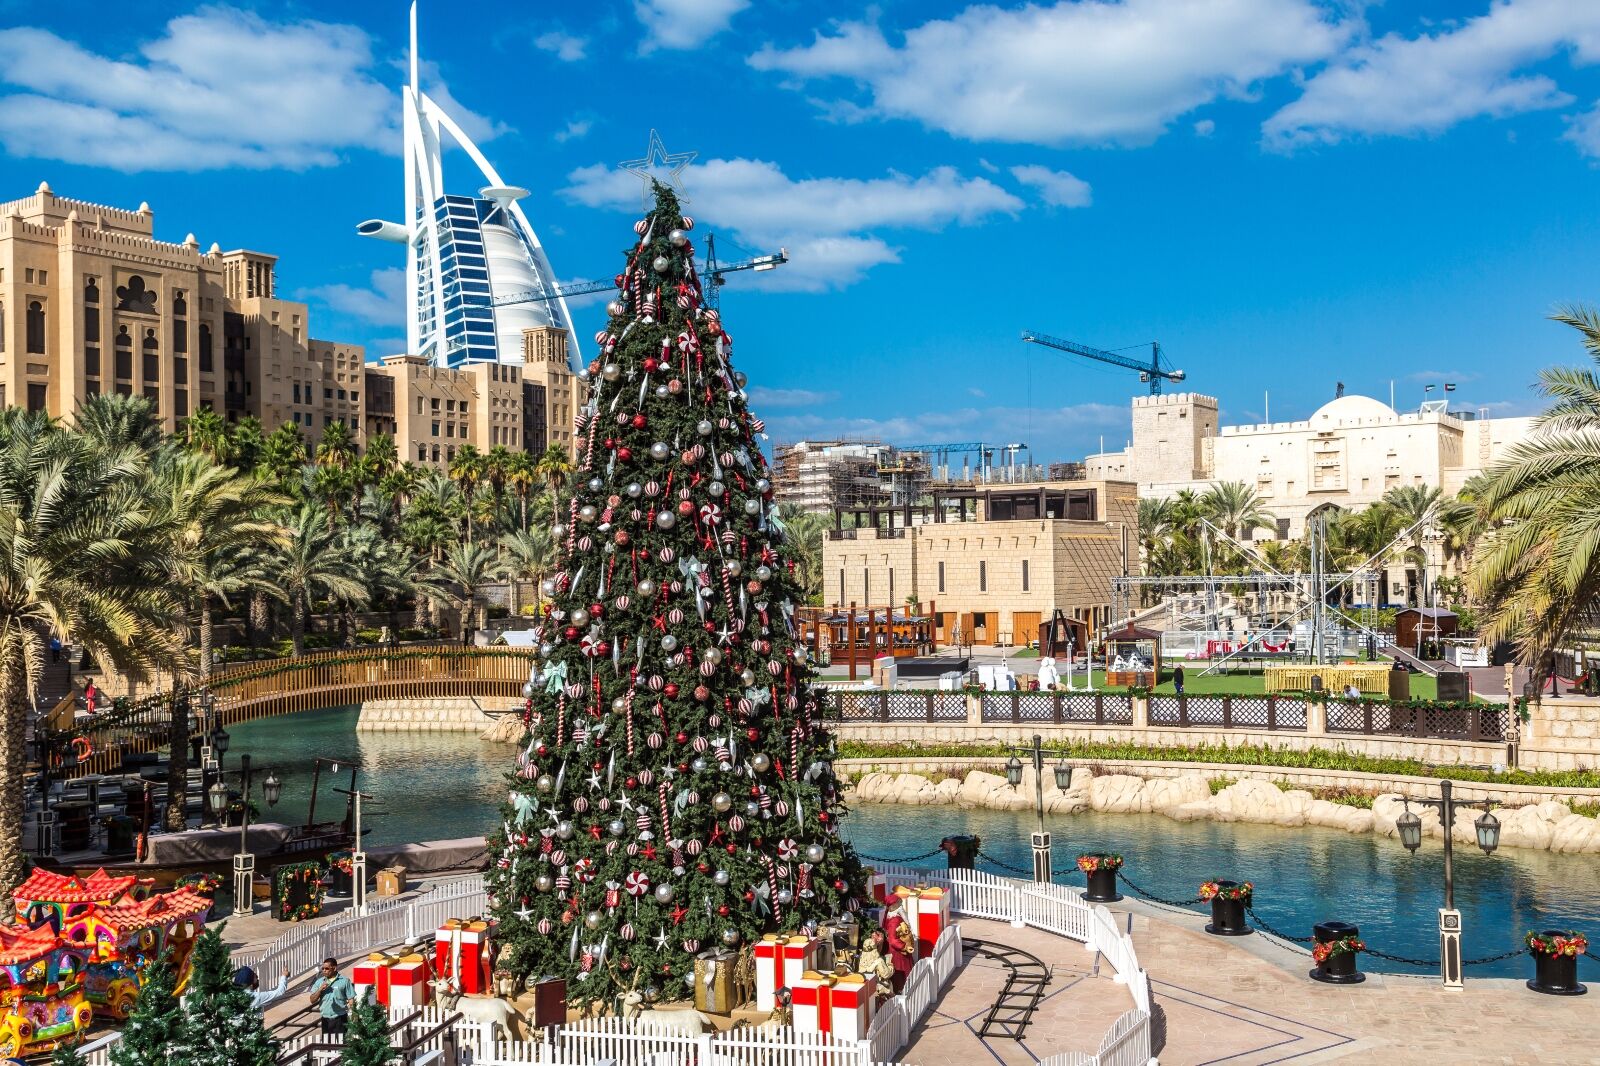 Christms tree in Dubai one of the suggestions on where to travel in December for an international vacation